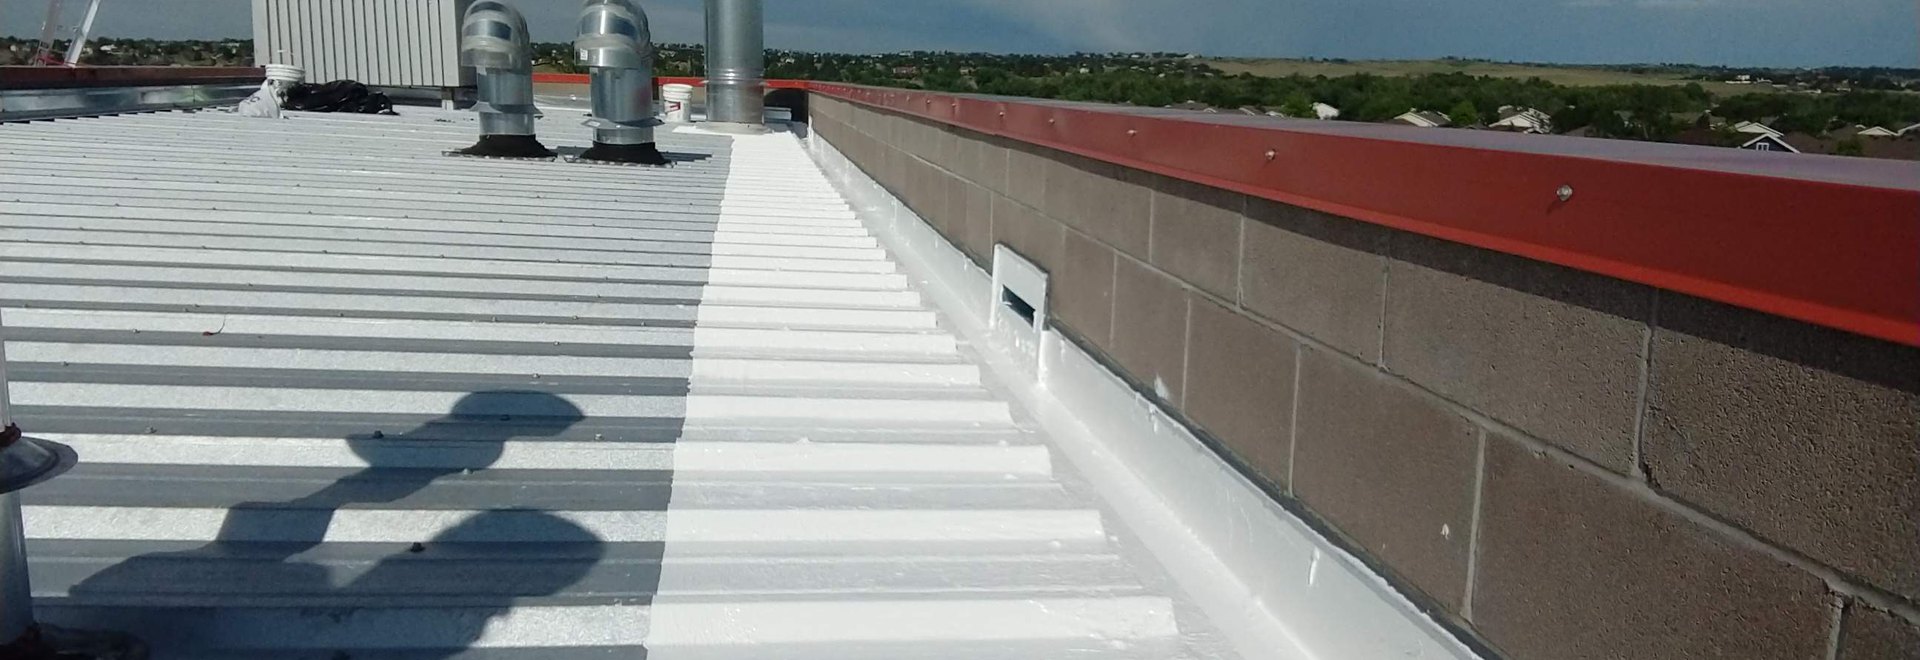 Professional Roof Installation for Denver, CO Homeowners